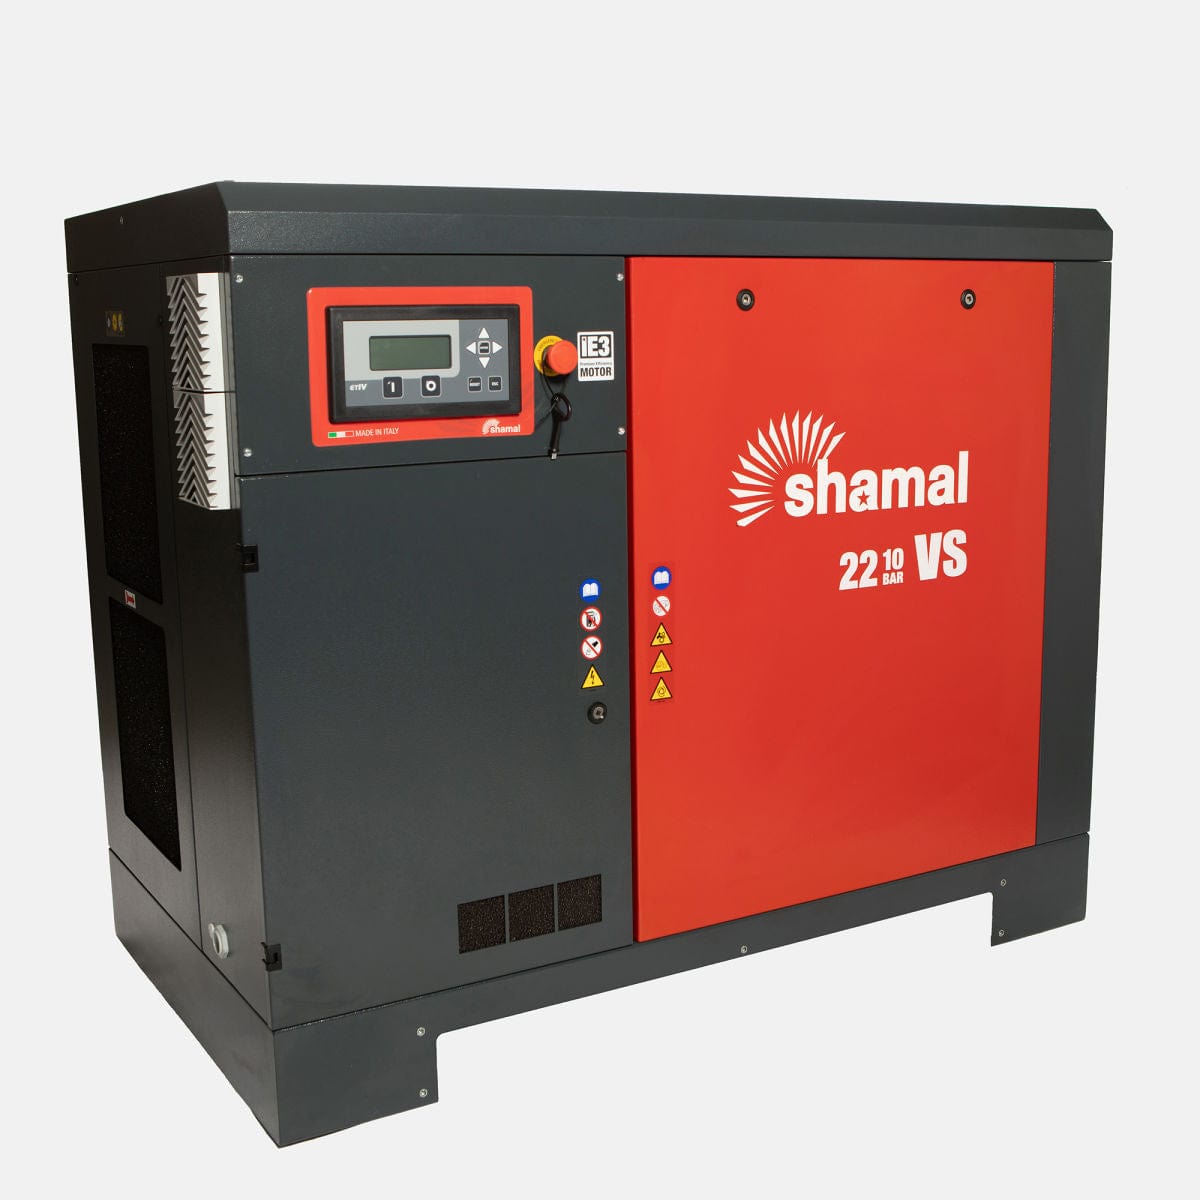 Shamal Screw Air Compressor 30HP 900L (STORM22-10) - Reliable Industrial Air Compressor for Medium to Large-Scale Applications in Accra, Ghana | Supply Master Compressor & Air Tool Accessories Buy Tools hardware Building materials